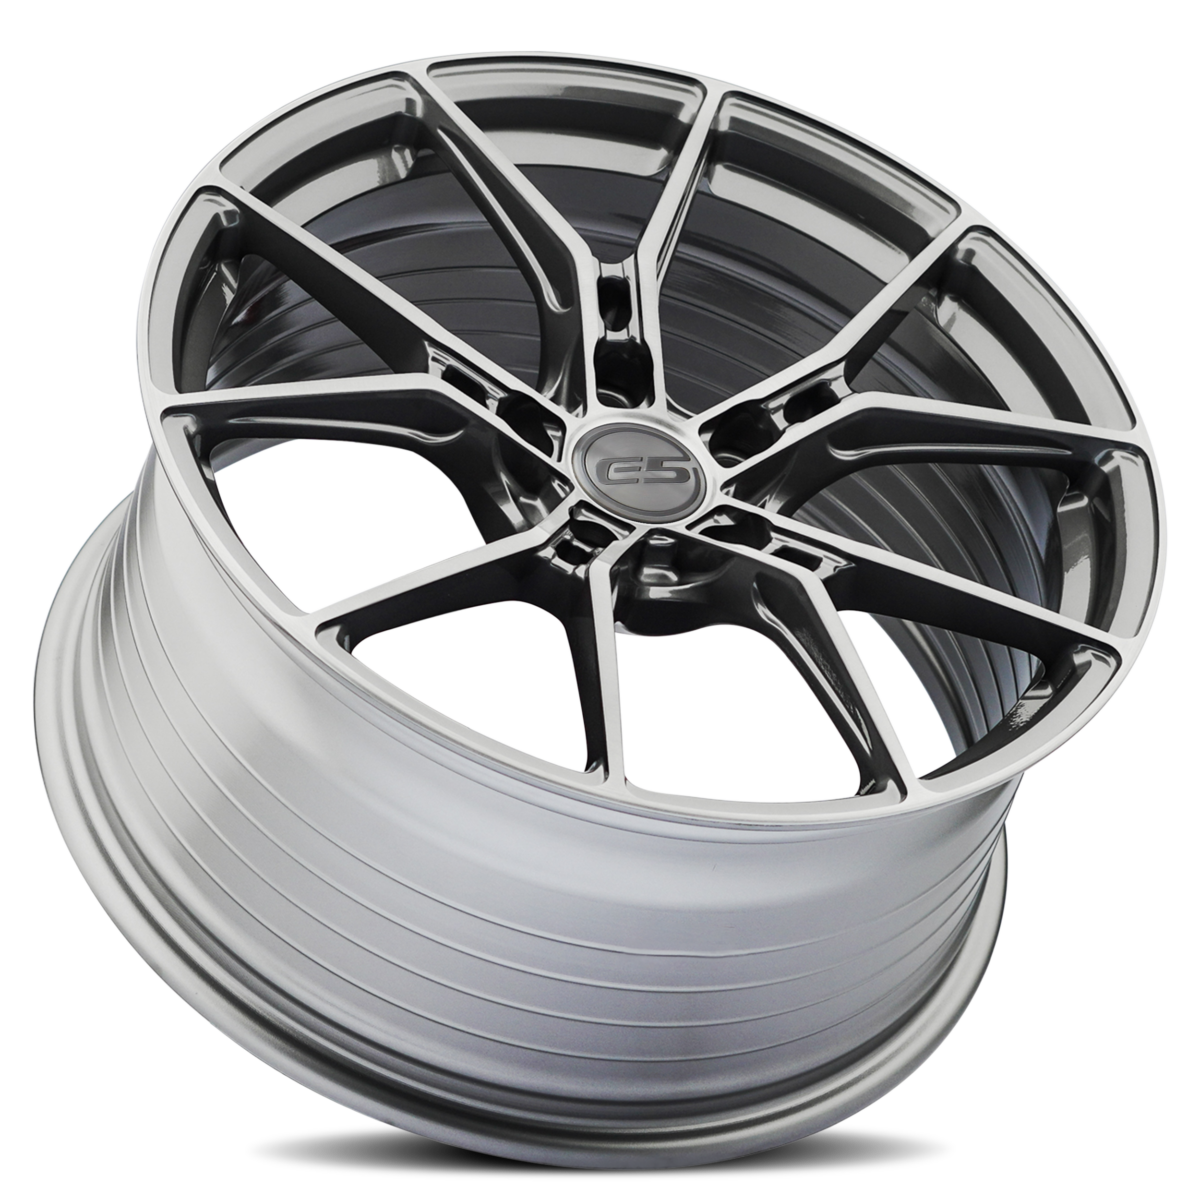 Corvette Wheels: Enhance Your Car’s Performance and Style